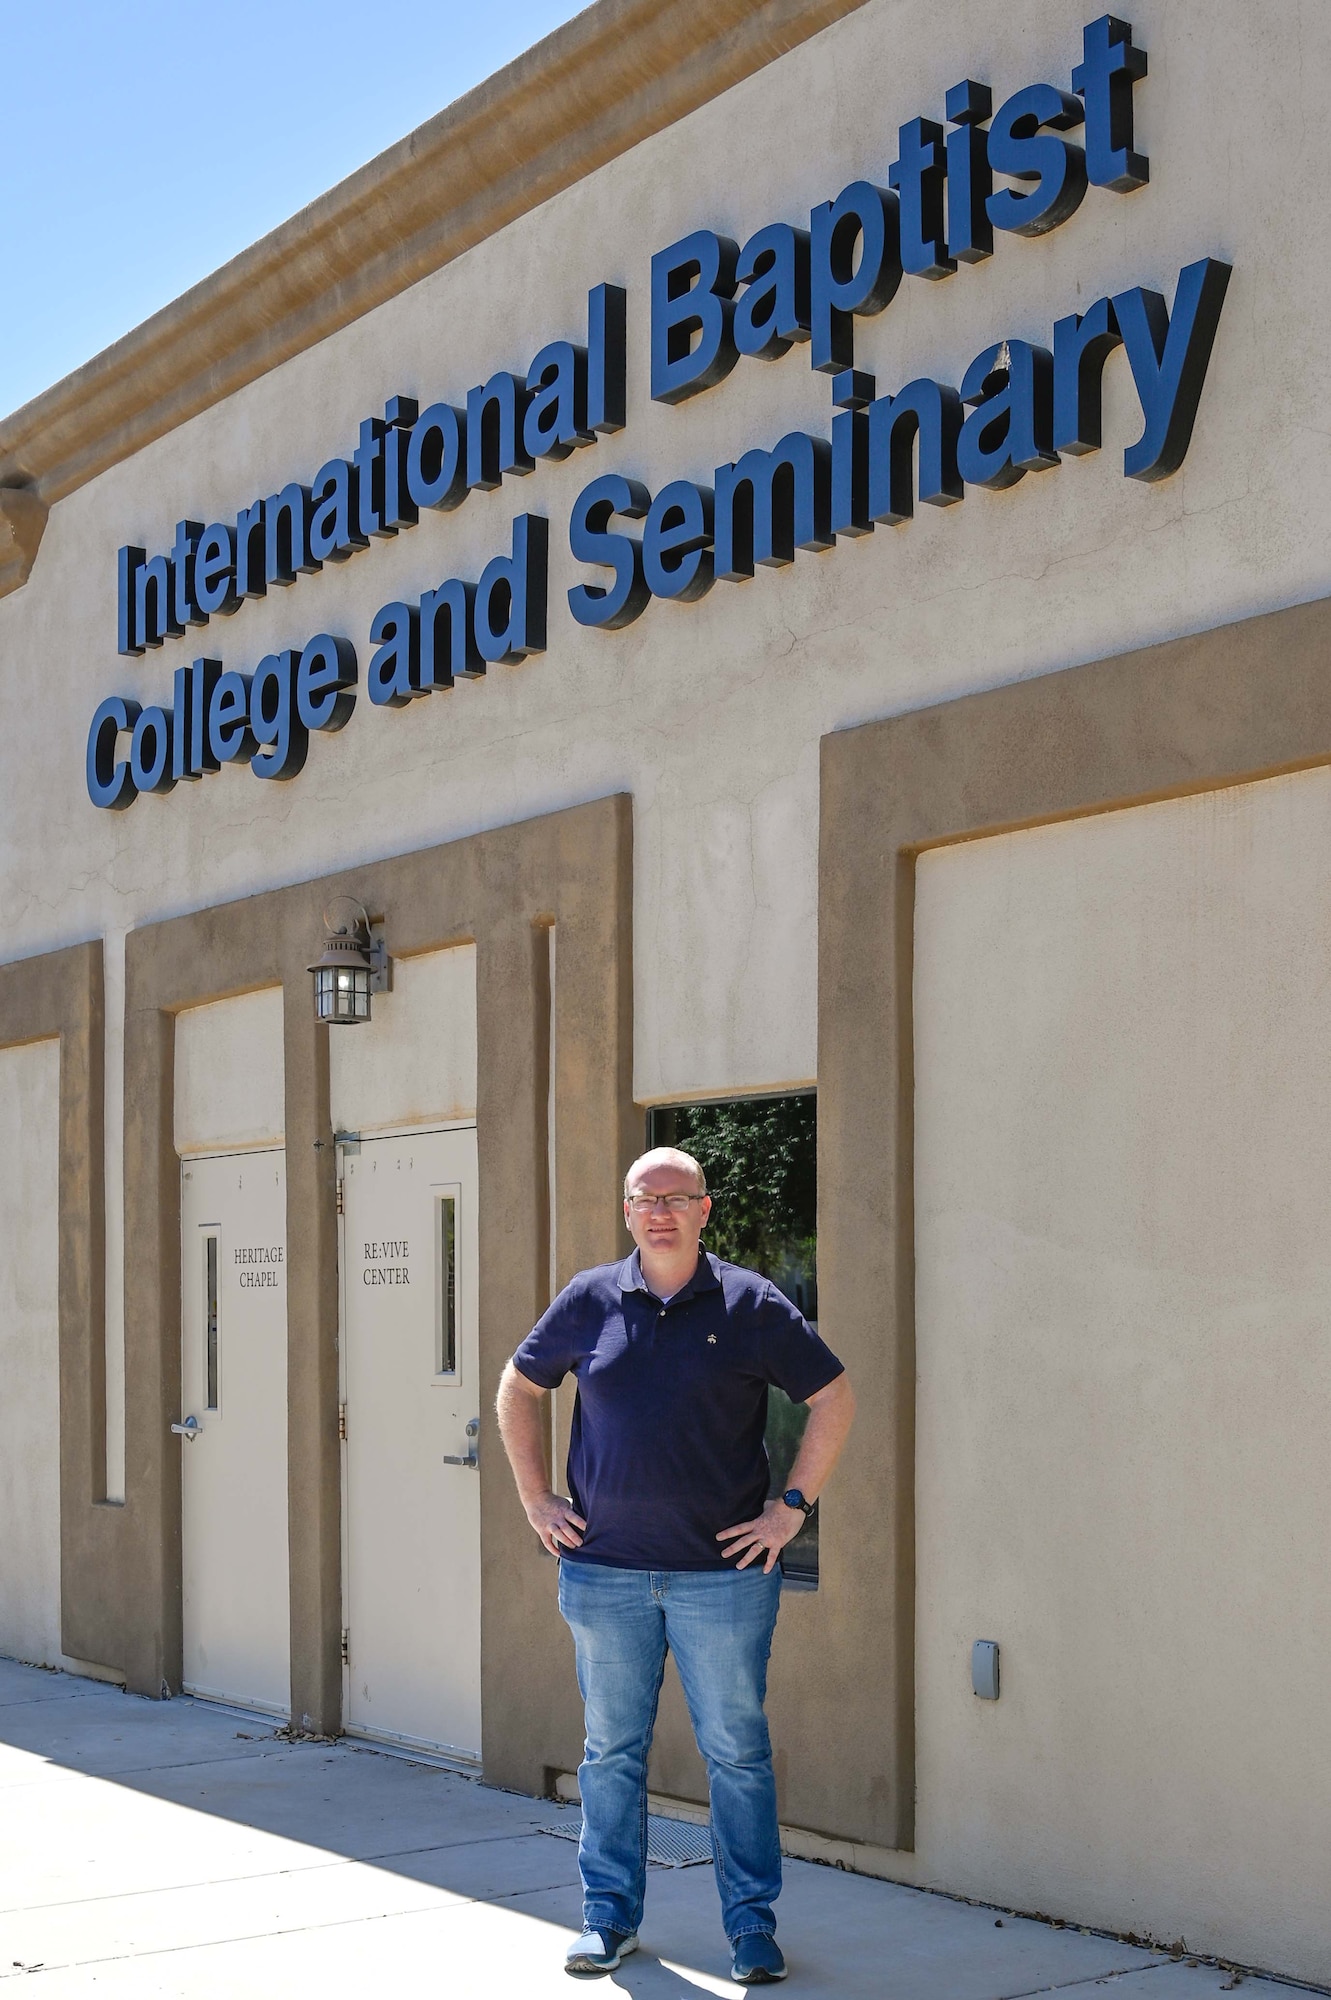 In his civilian career, Maj. Nathan Mestler is president of the International Baptist College and Seminary in Chandler, Arizona. As a drill-status Guardsman in the Arizona Air National Guard, he is the 162nd Wing chaplain at Morris Air National Guard Base in Tucson, Arizona.